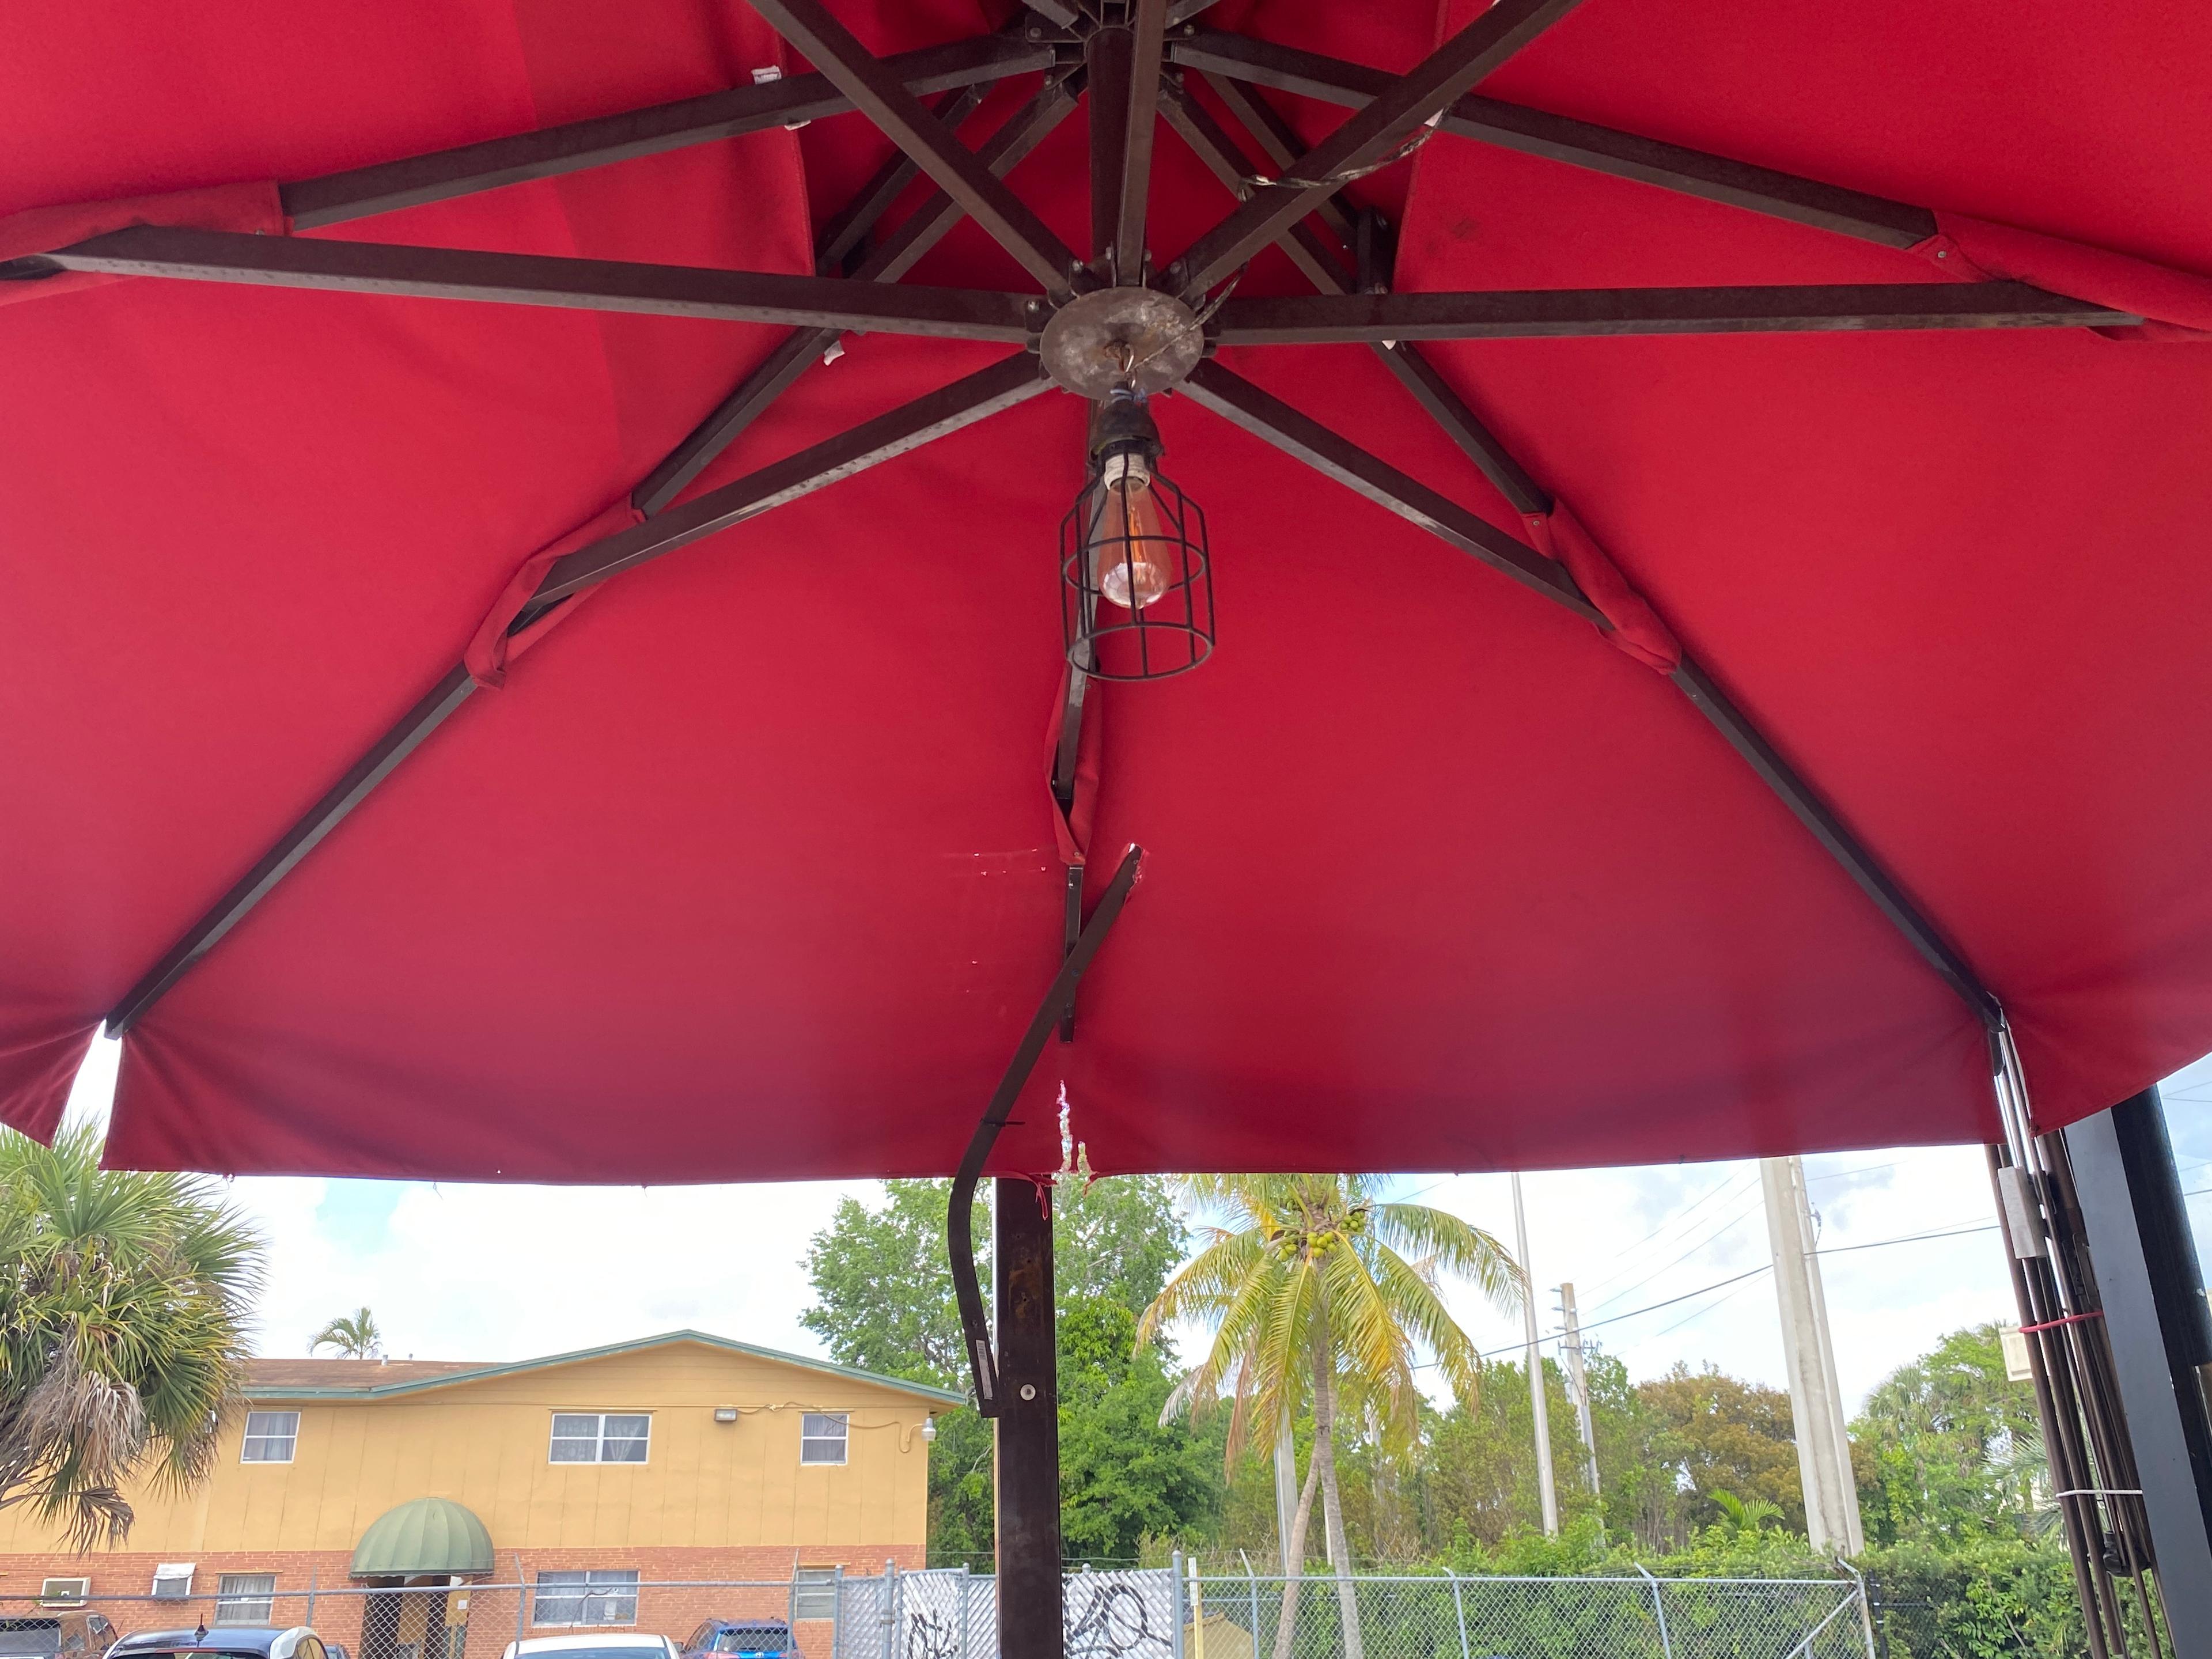 Large 110" Outdoor Canopy Umbrella it does have some tares.